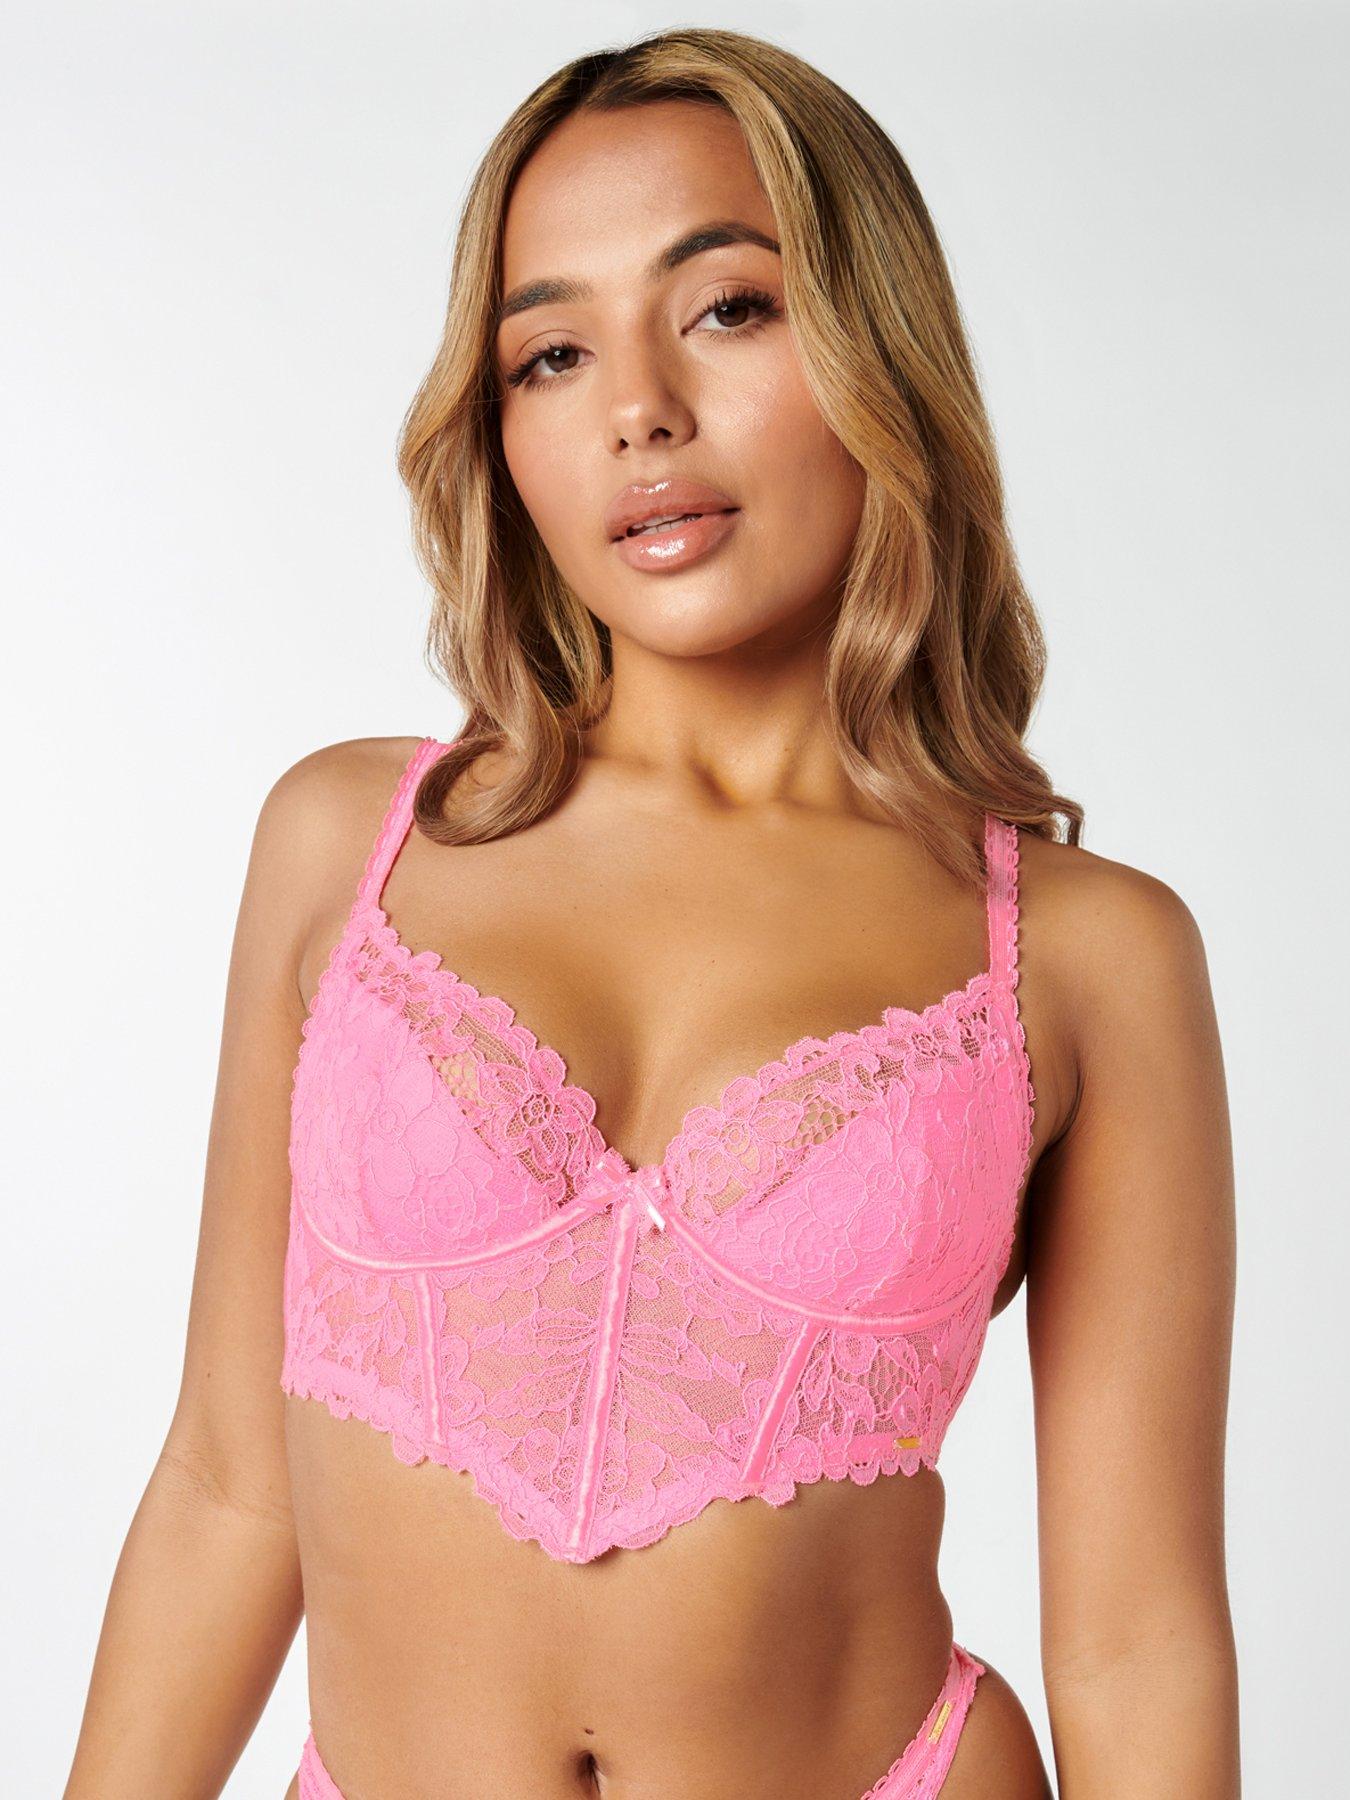 Lingerie for a fuller bust? Look no further than Boux Avenue's new col